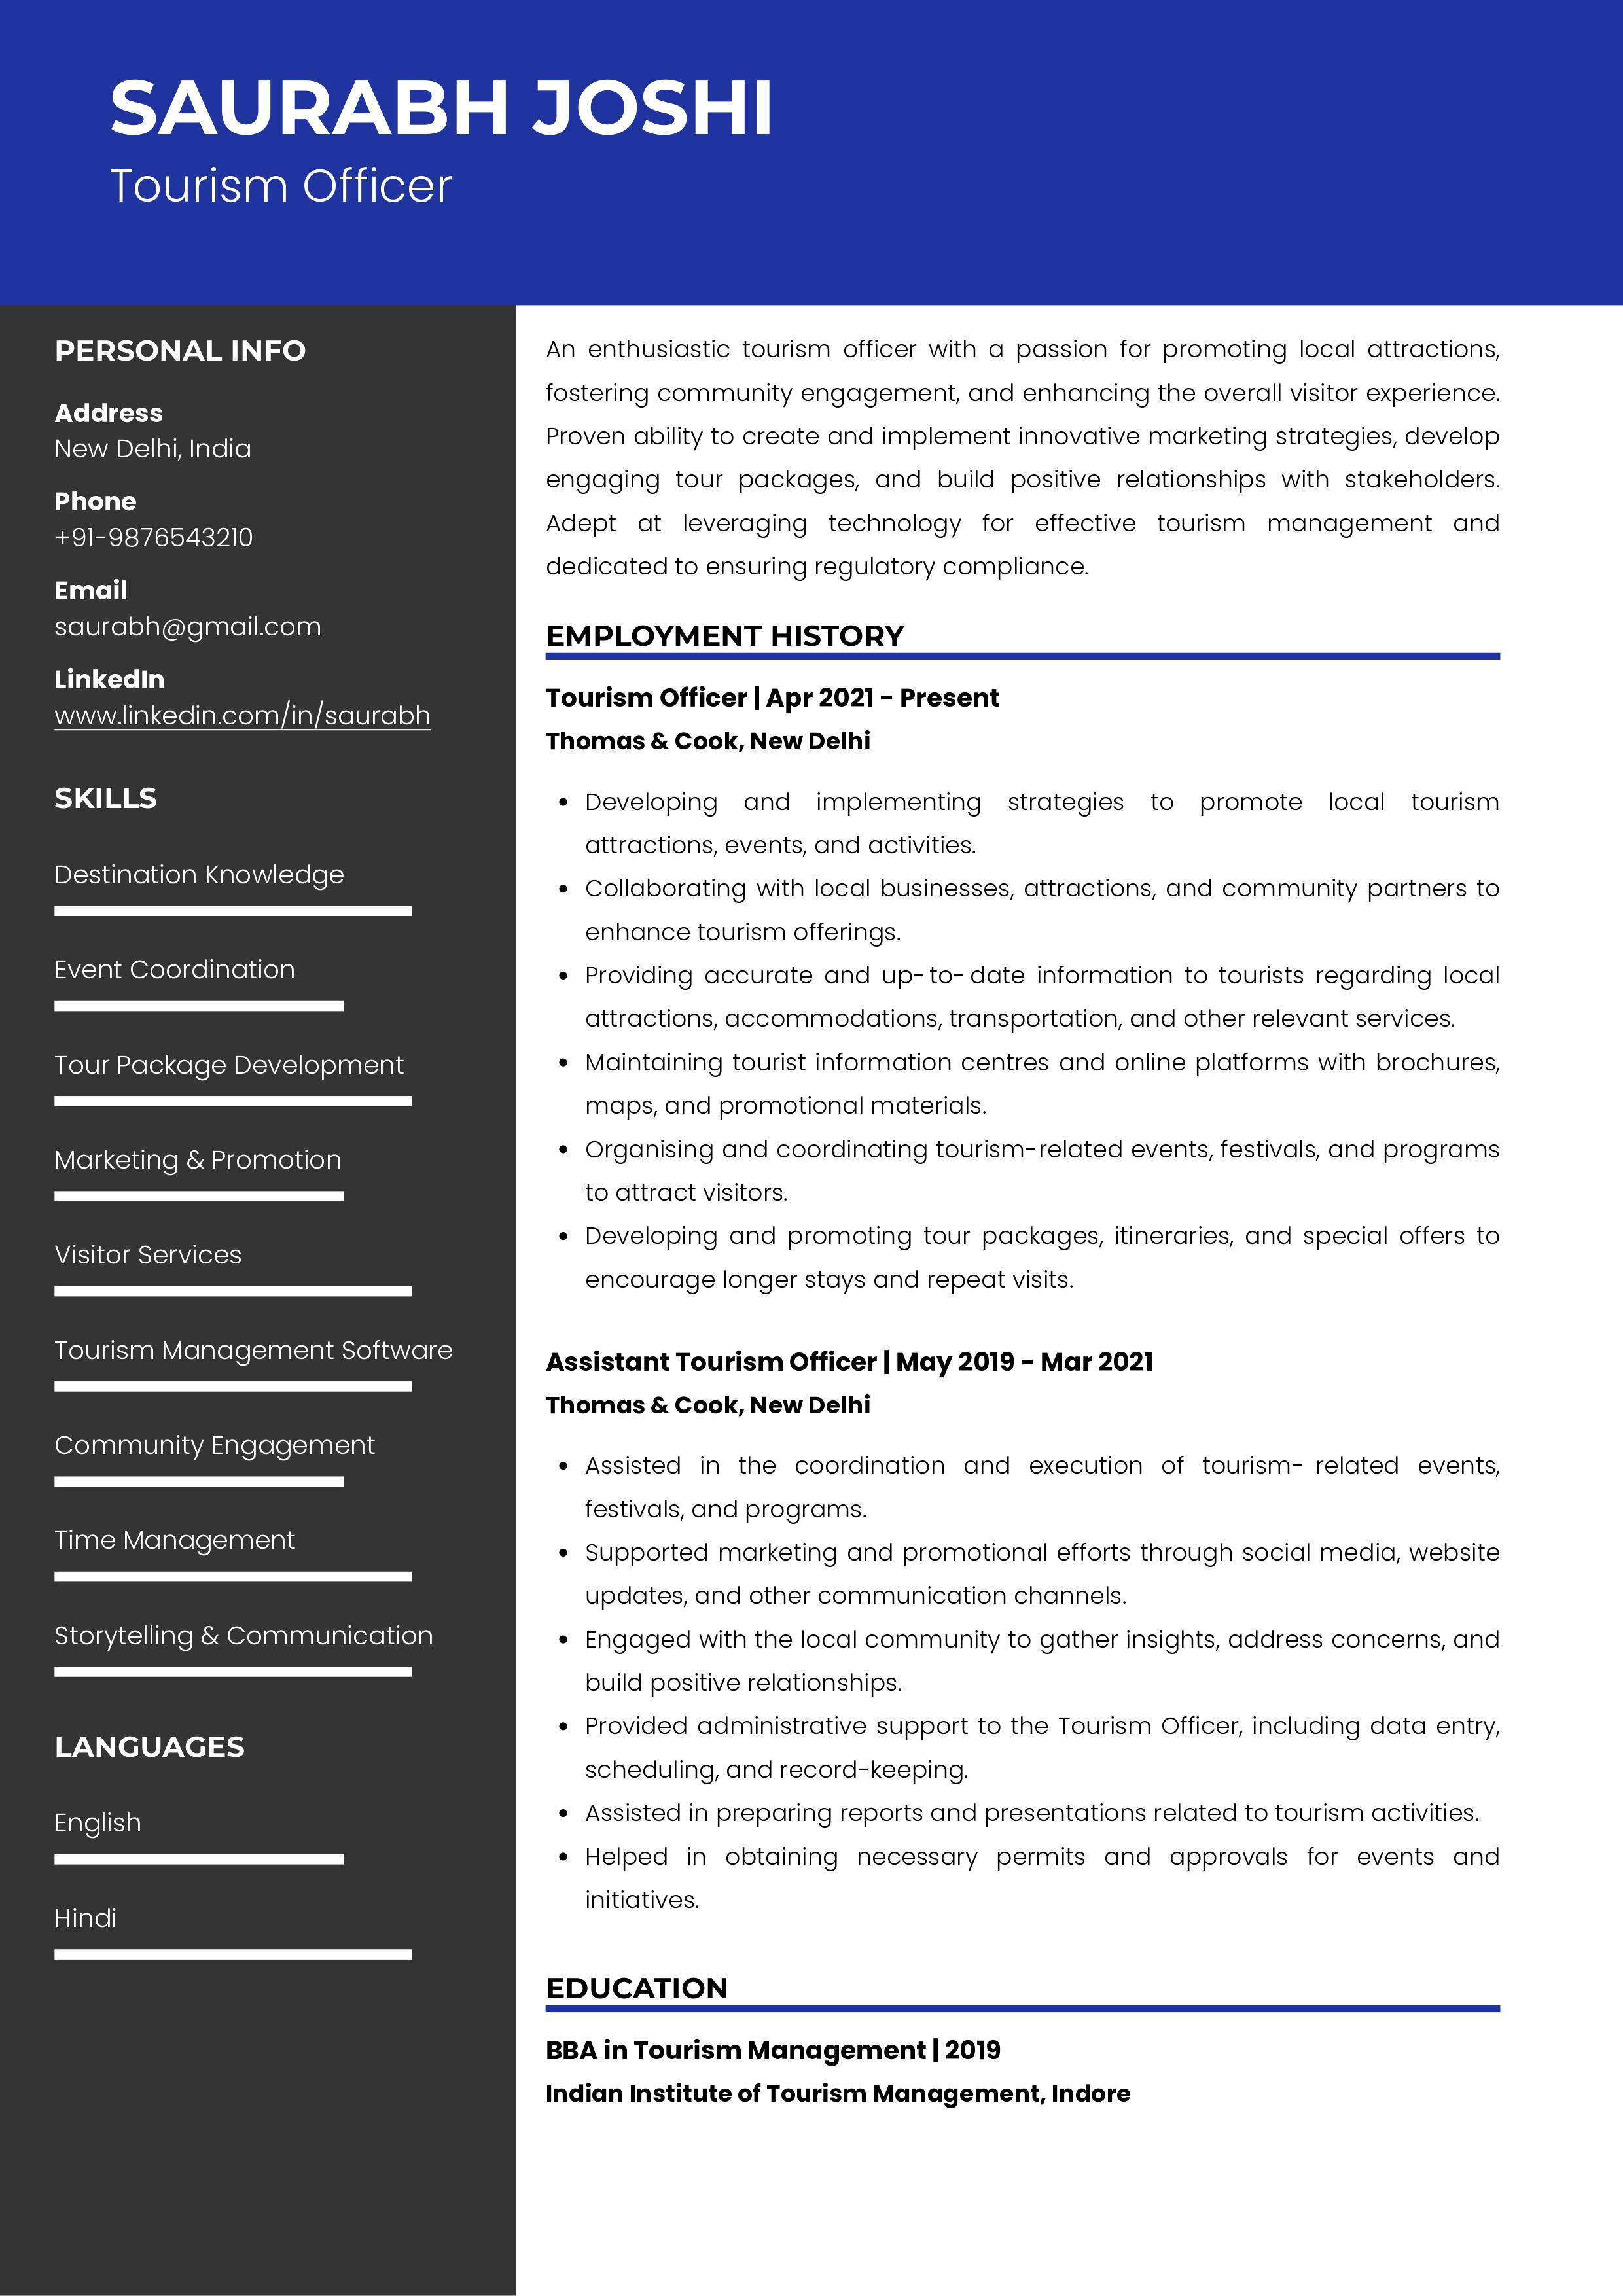 Sample Resume of Tourism Officer | Free Resume Templates & Samples on Resumod.co